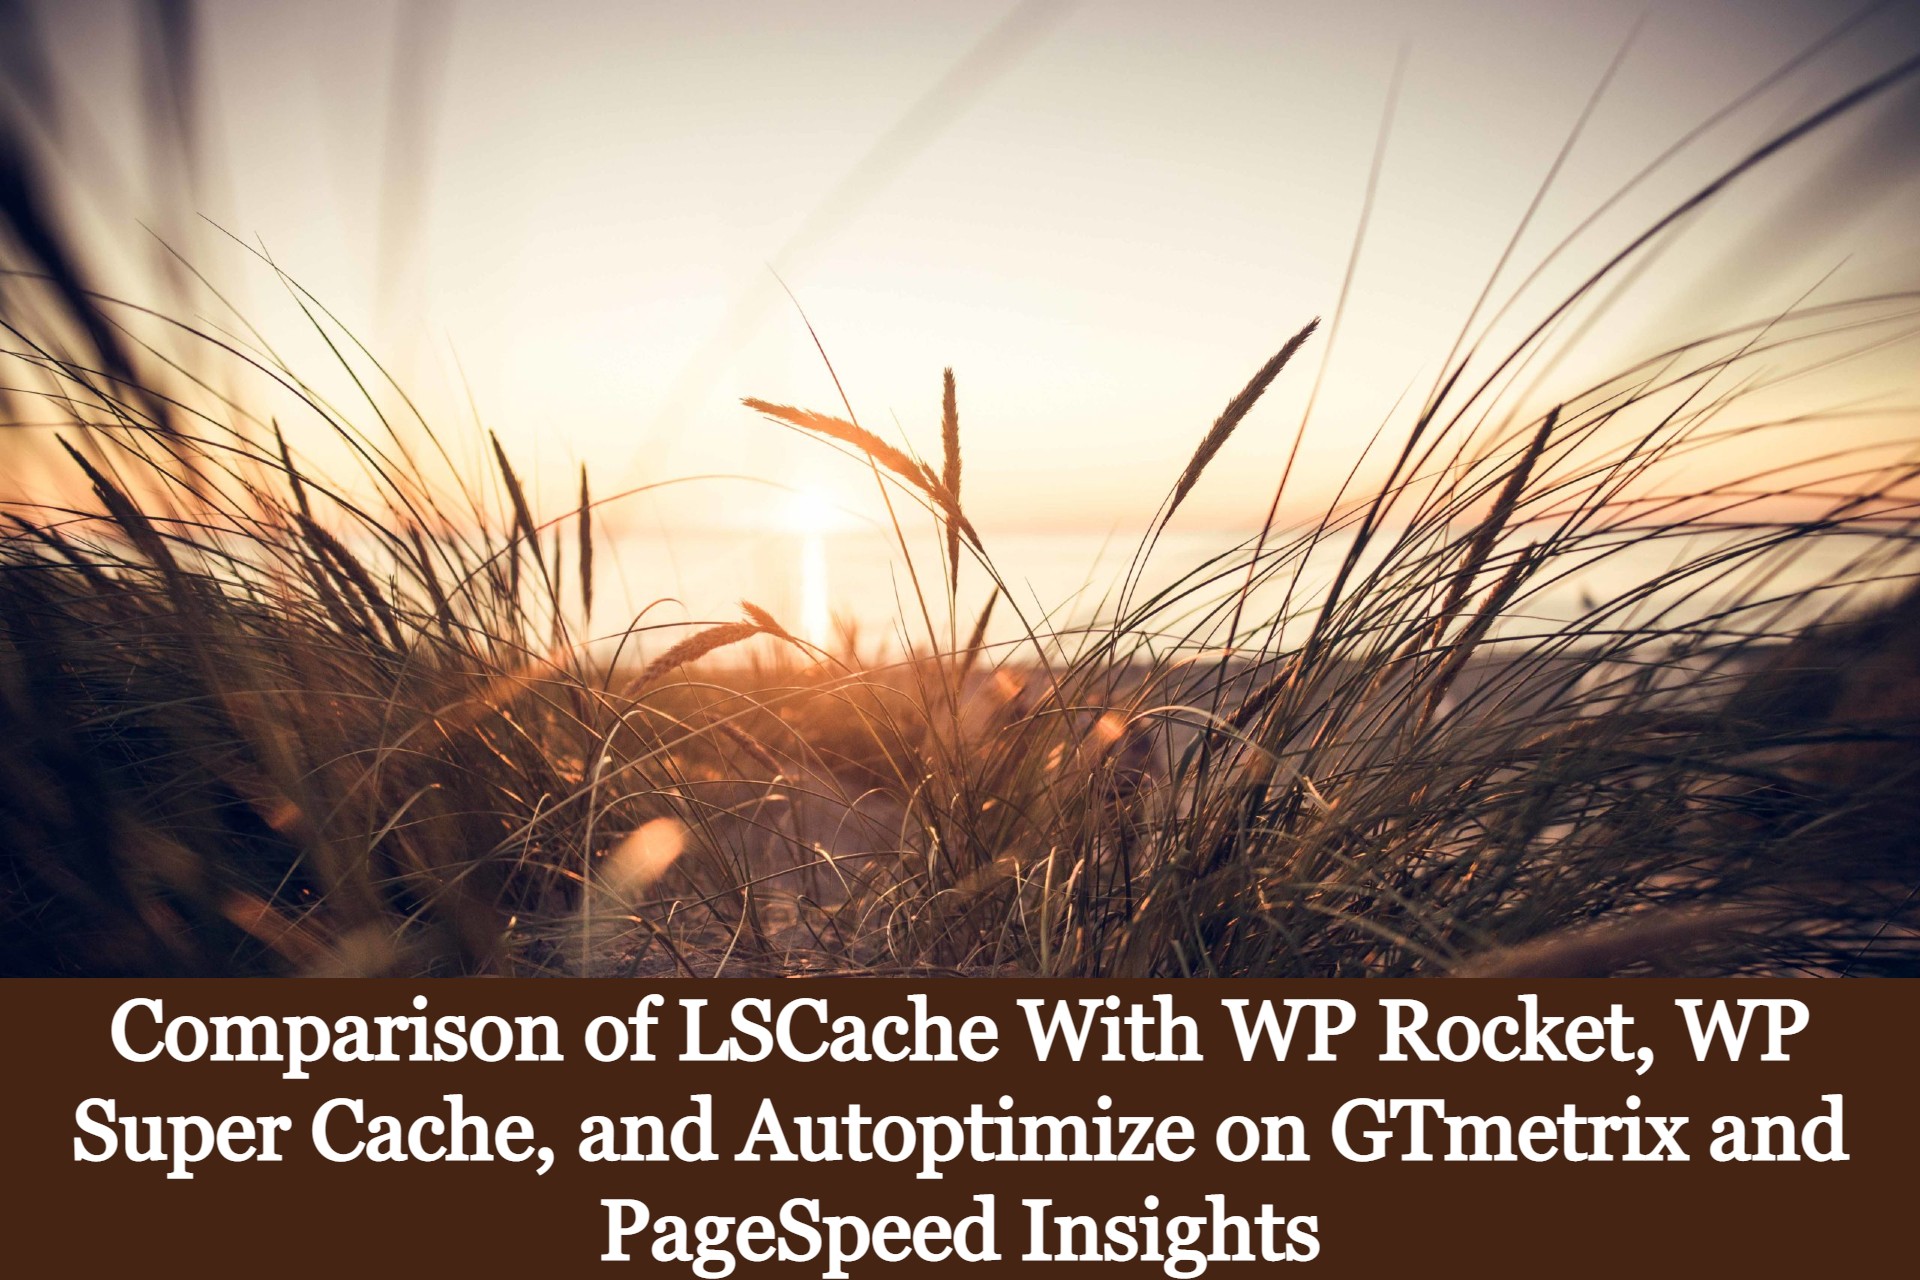 Comparison of LSCache With WP Rocket, WP Super Cache, and Autoptimize on GTmetrix and PageSpeed Insights